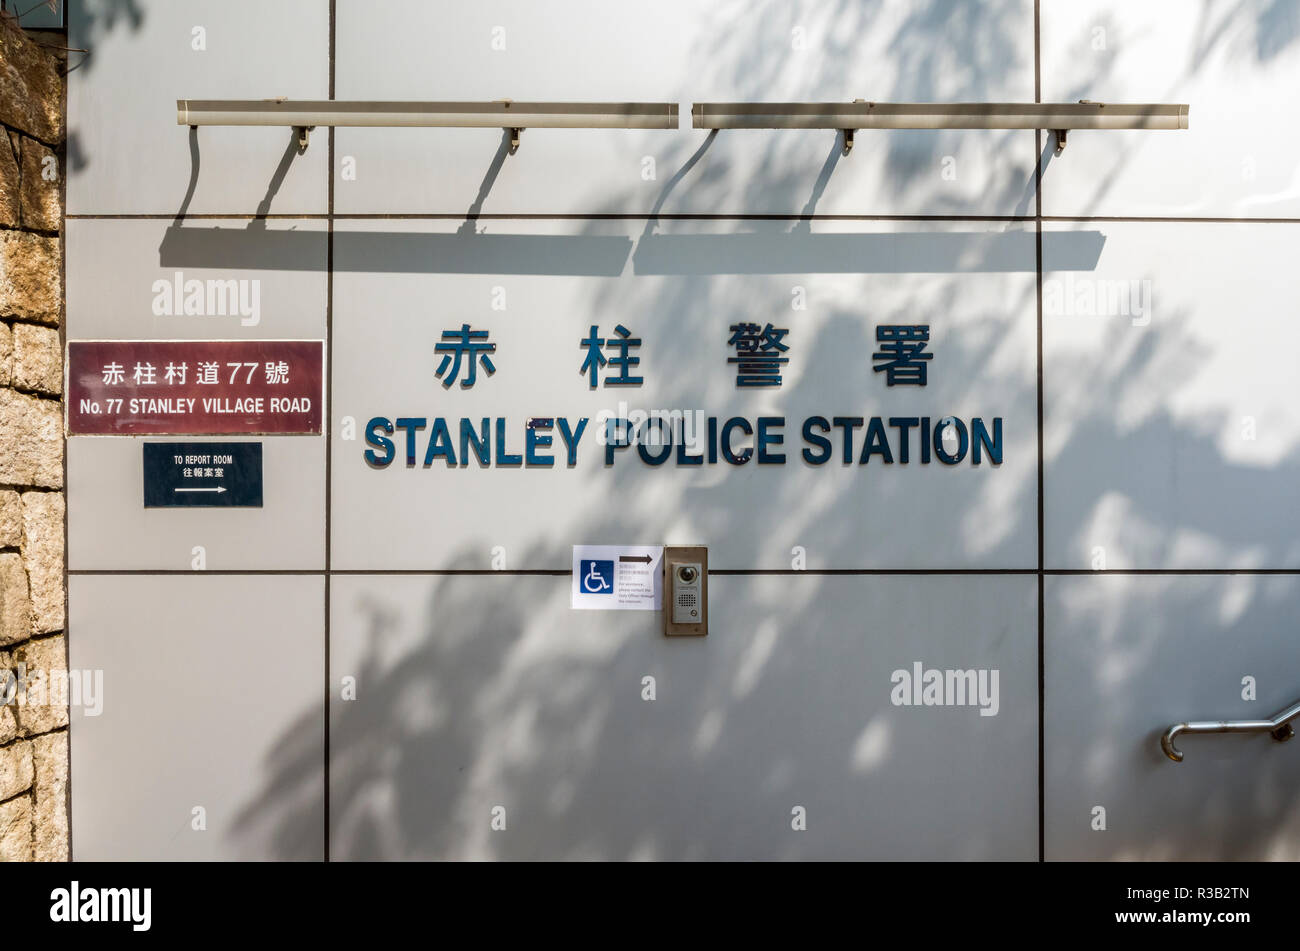 Stanley Police Station sign, Stanley, Hong Kong Stock Photo